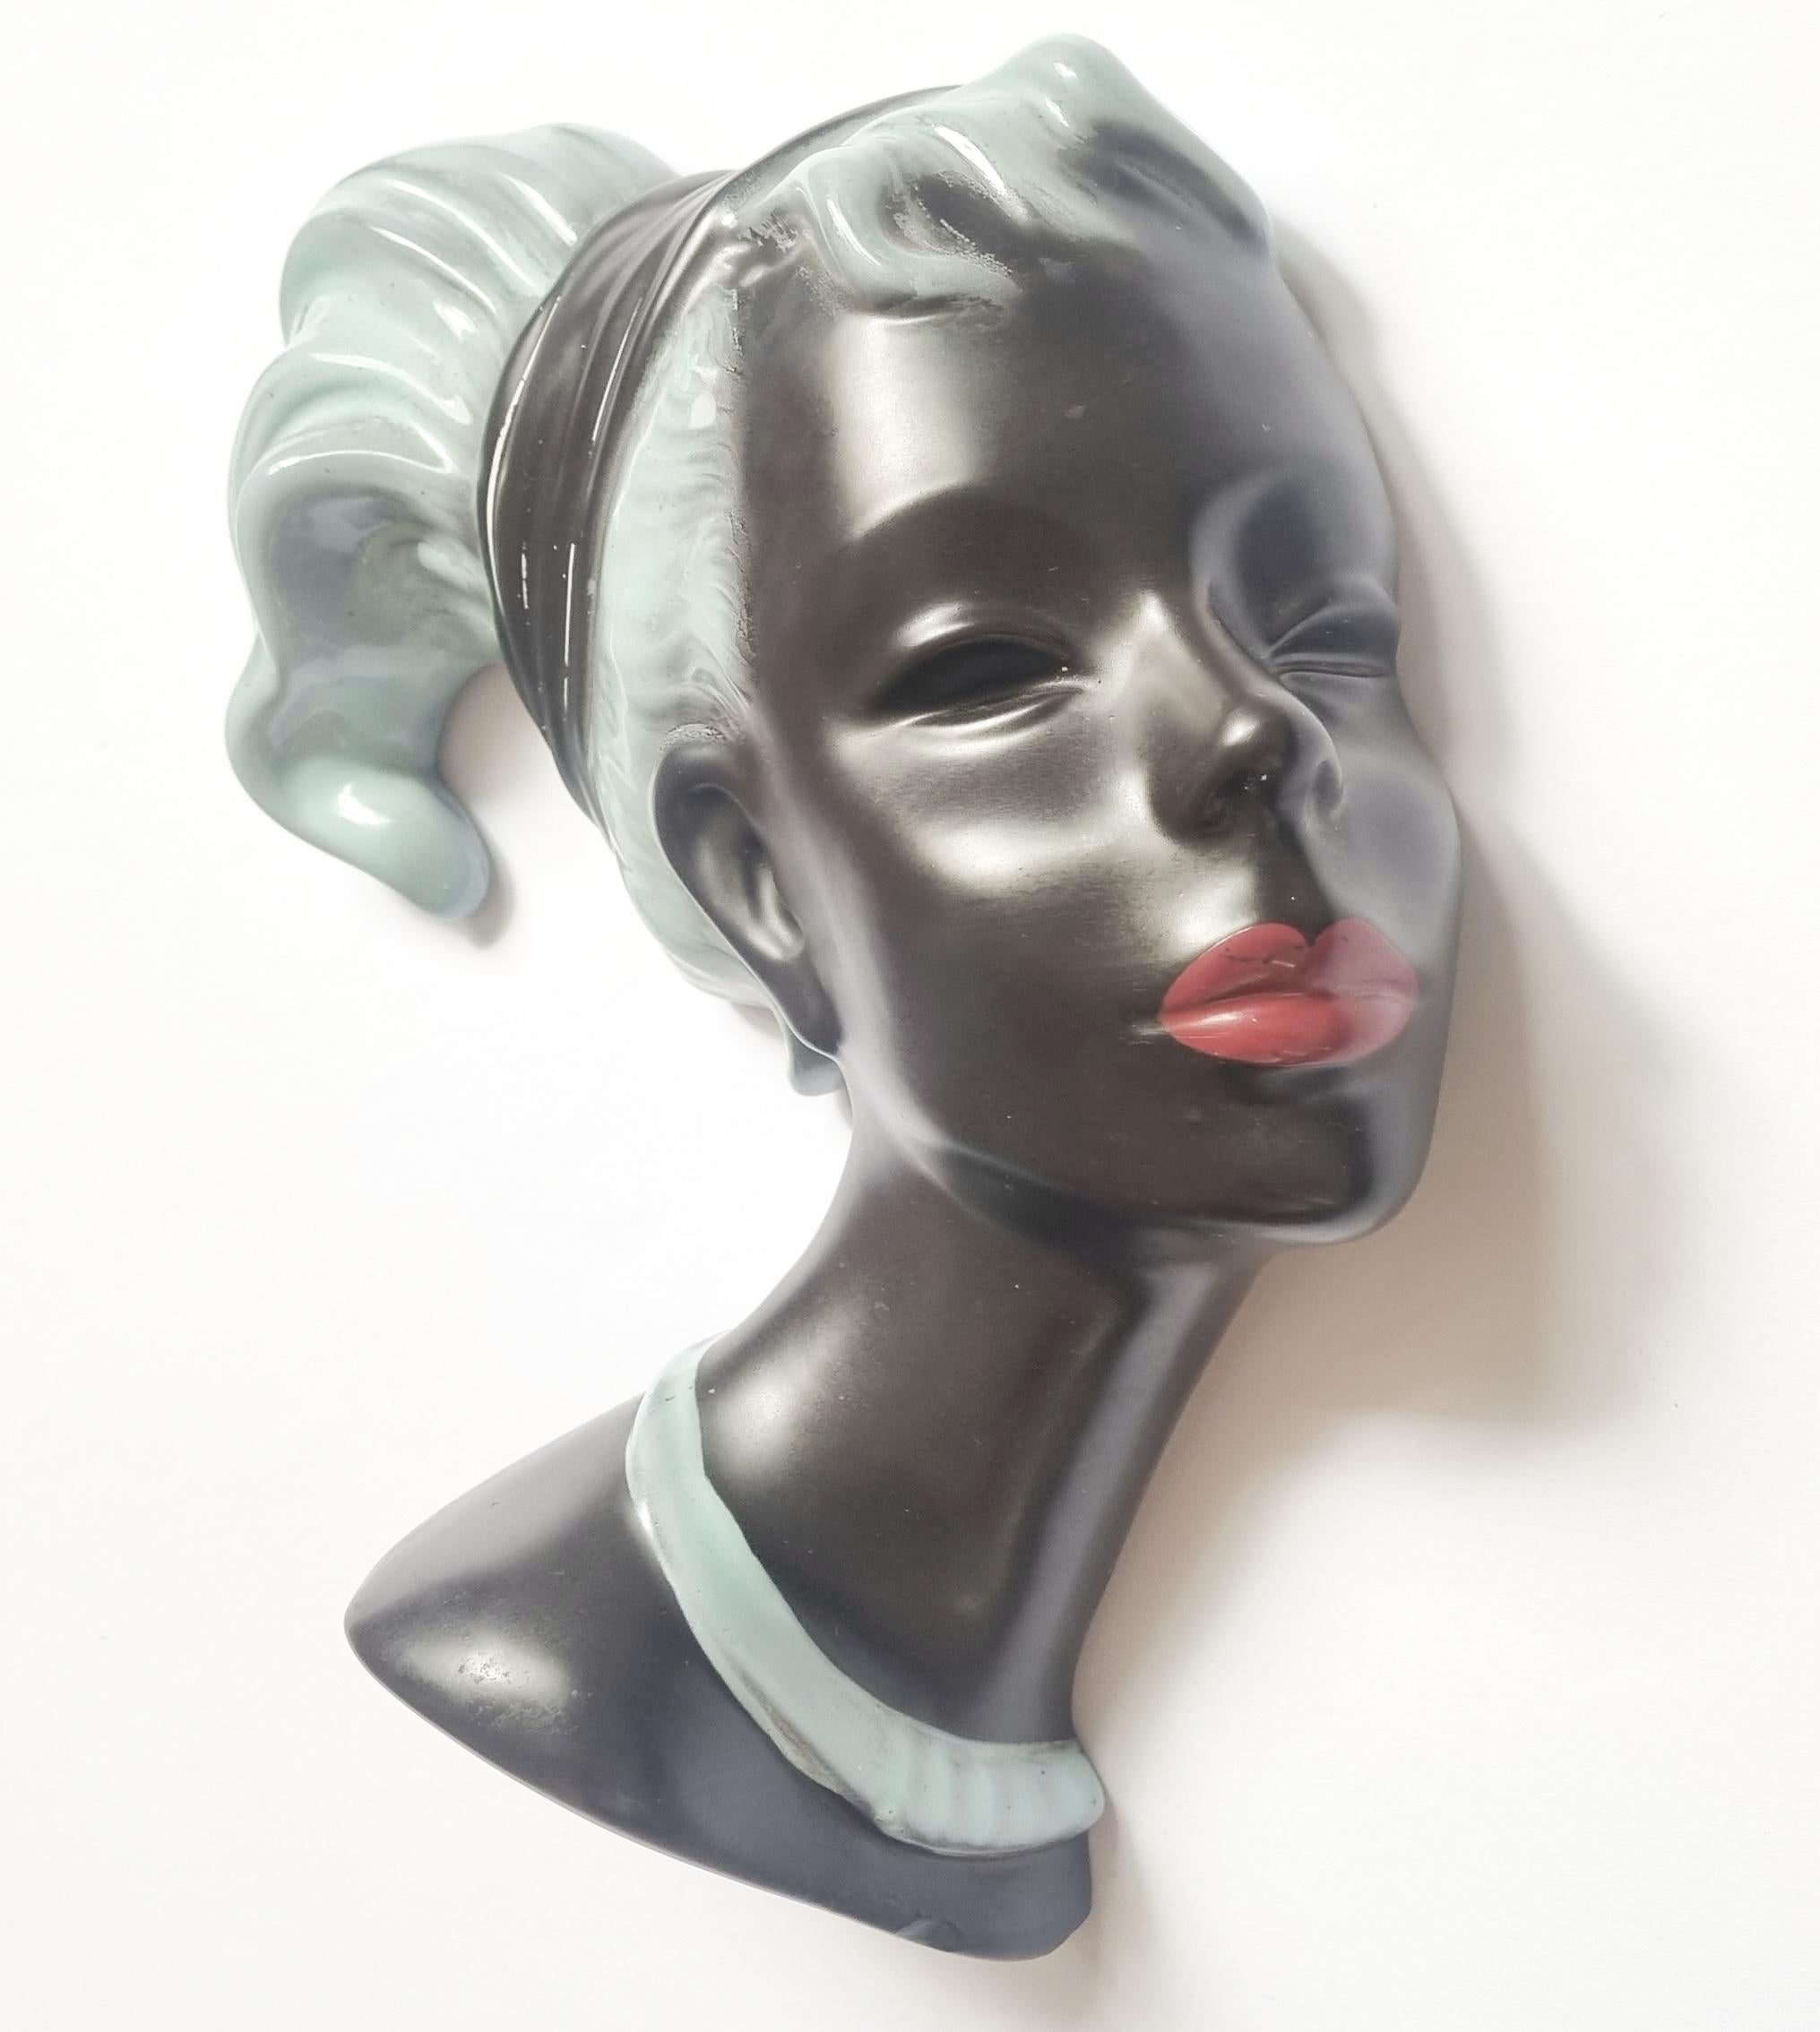 Midcentury Wall Ceramic Sculpture Woman Face Mask, Germany, 1960s For Sale 2